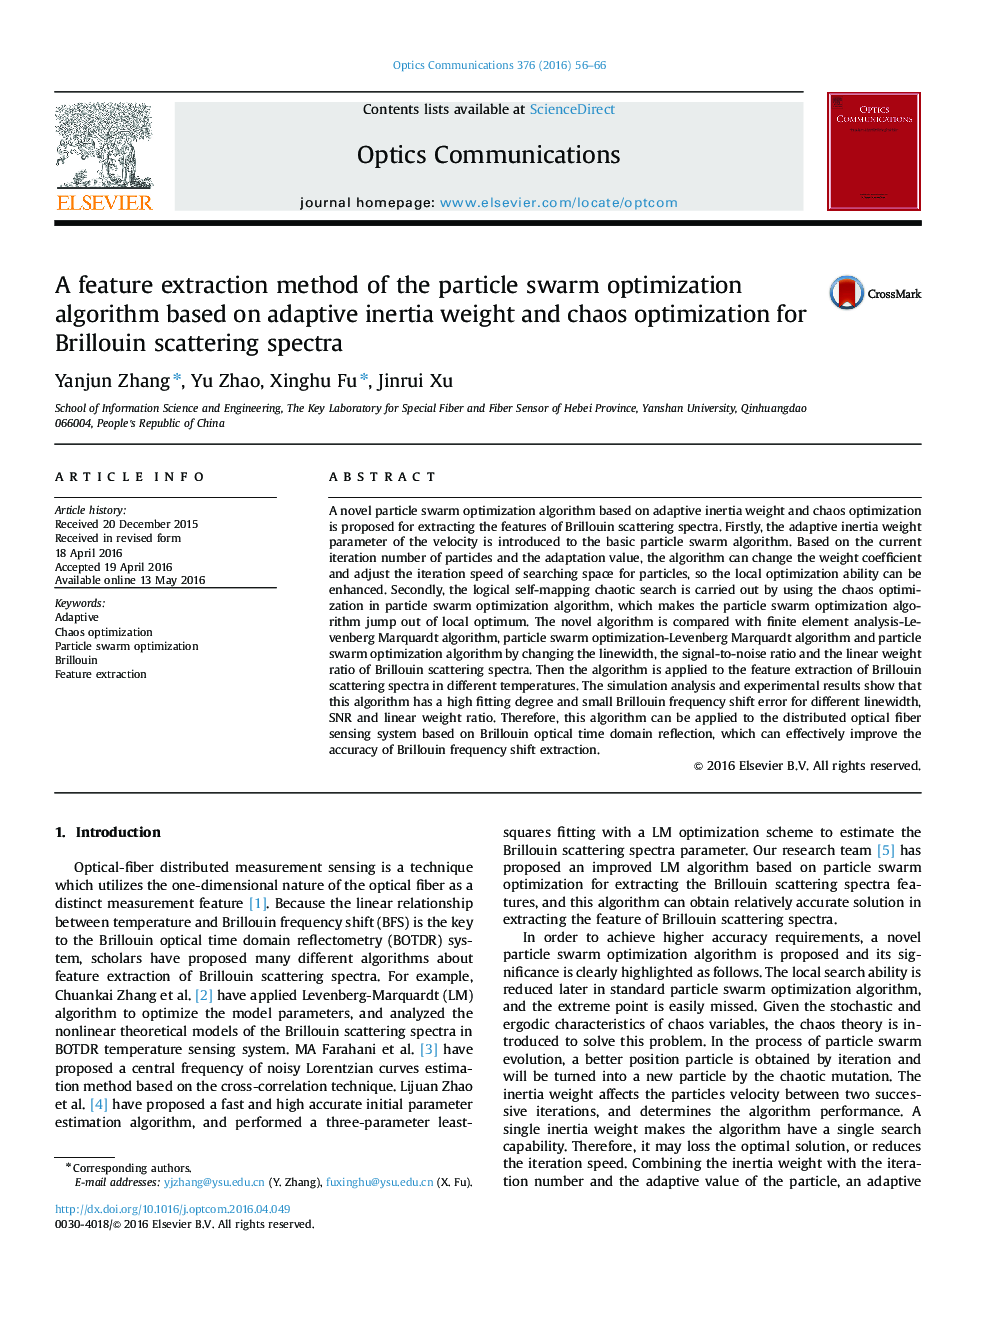 A feature extraction method of the particle swarm optimization algorithm based on adaptive inertia weight and chaos optimization for Brillouin scattering spectra